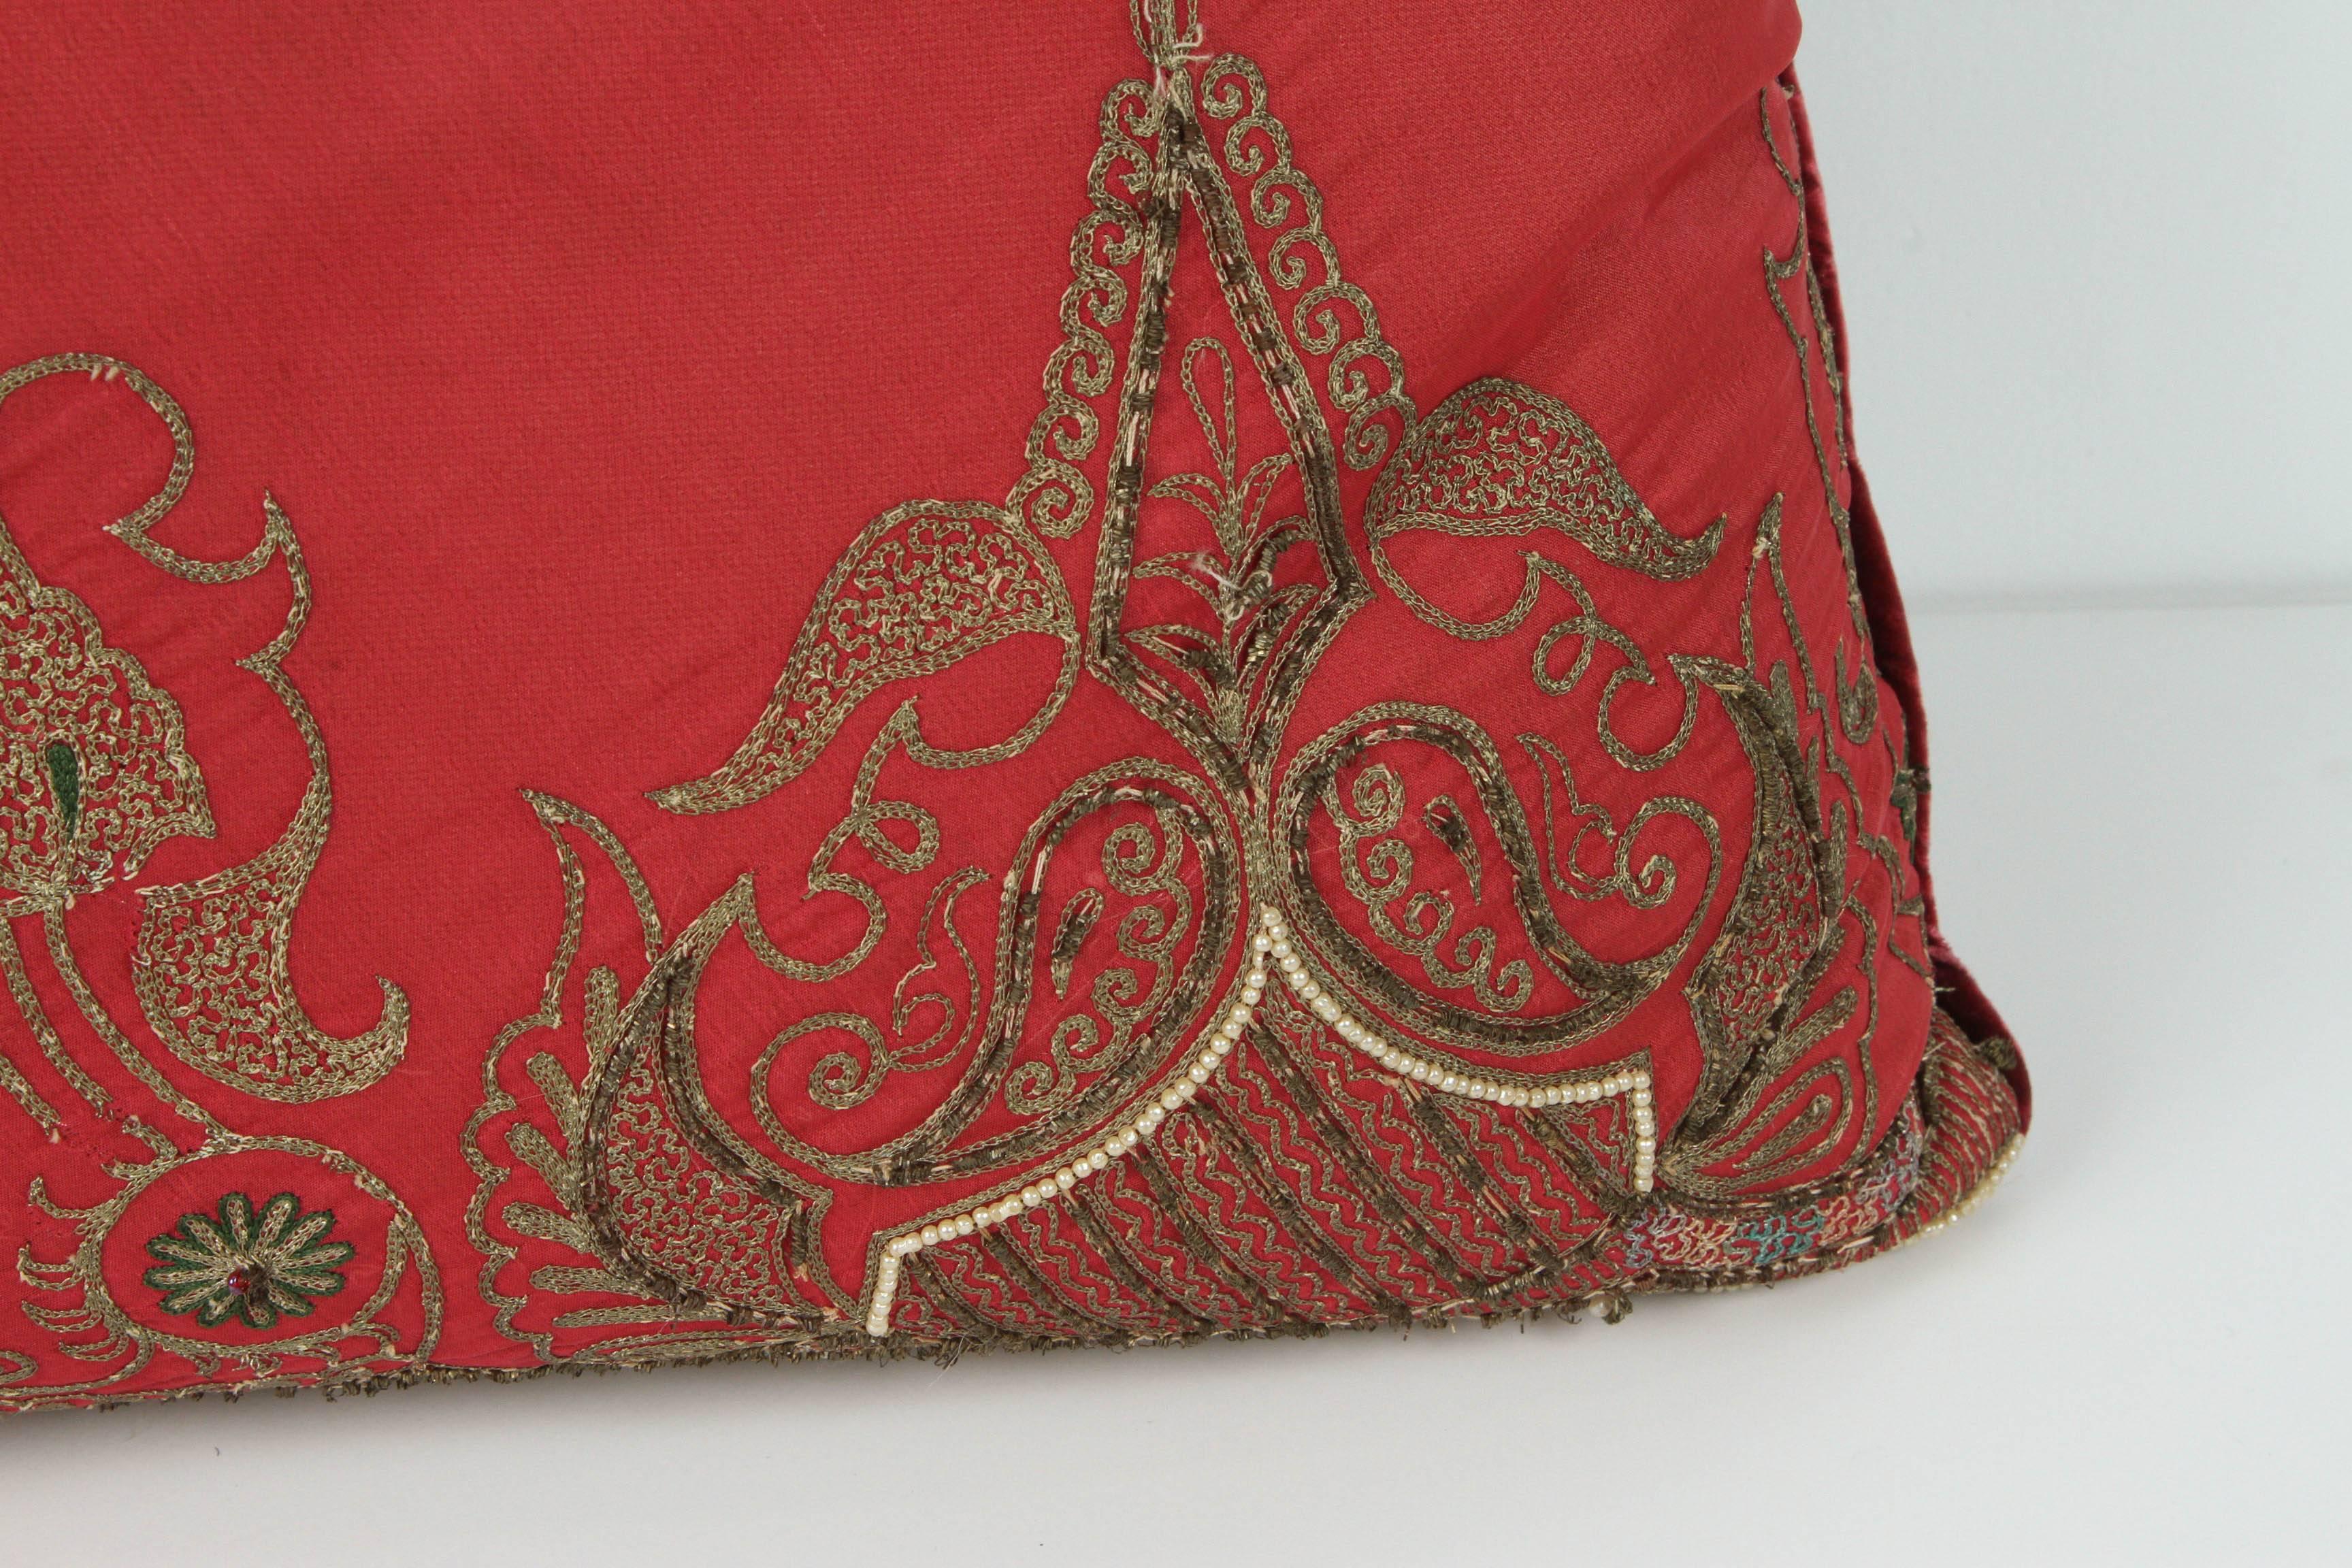 Hand-Crafted Antique Turkish Ottoman Silk Pillows with Metallic Threads a Pair